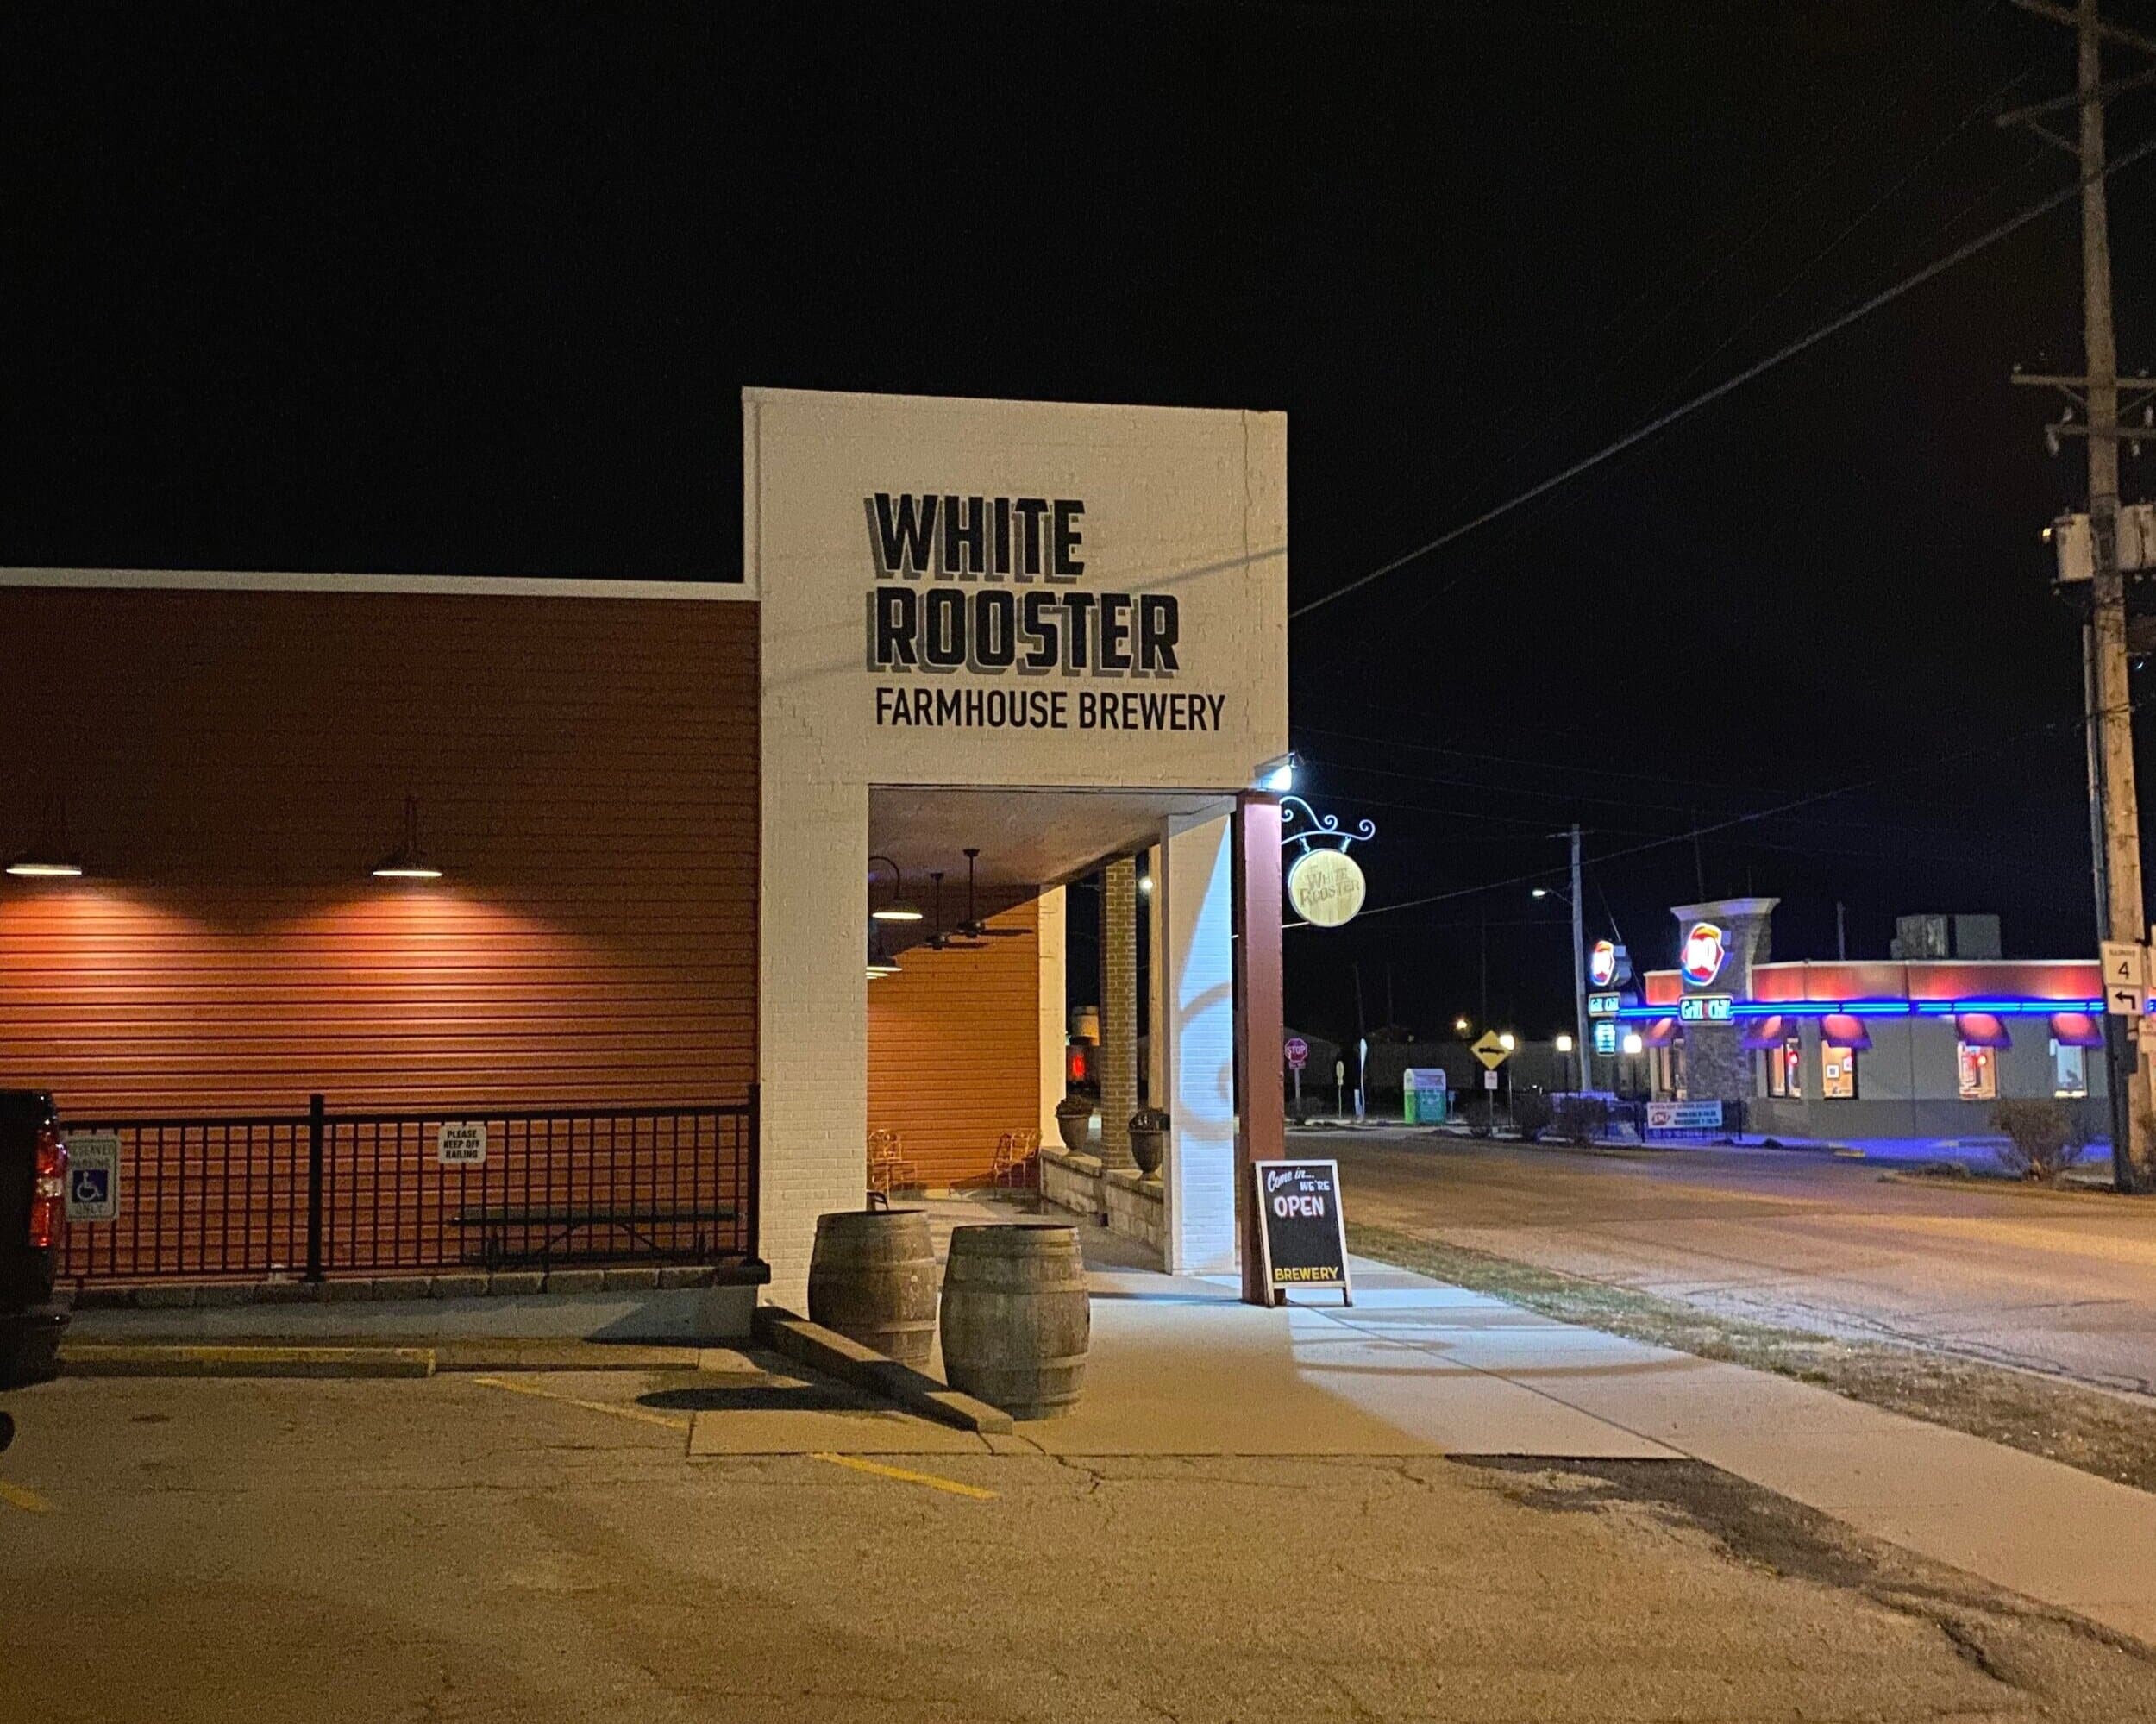 White Rooster Farmhouse Brewery